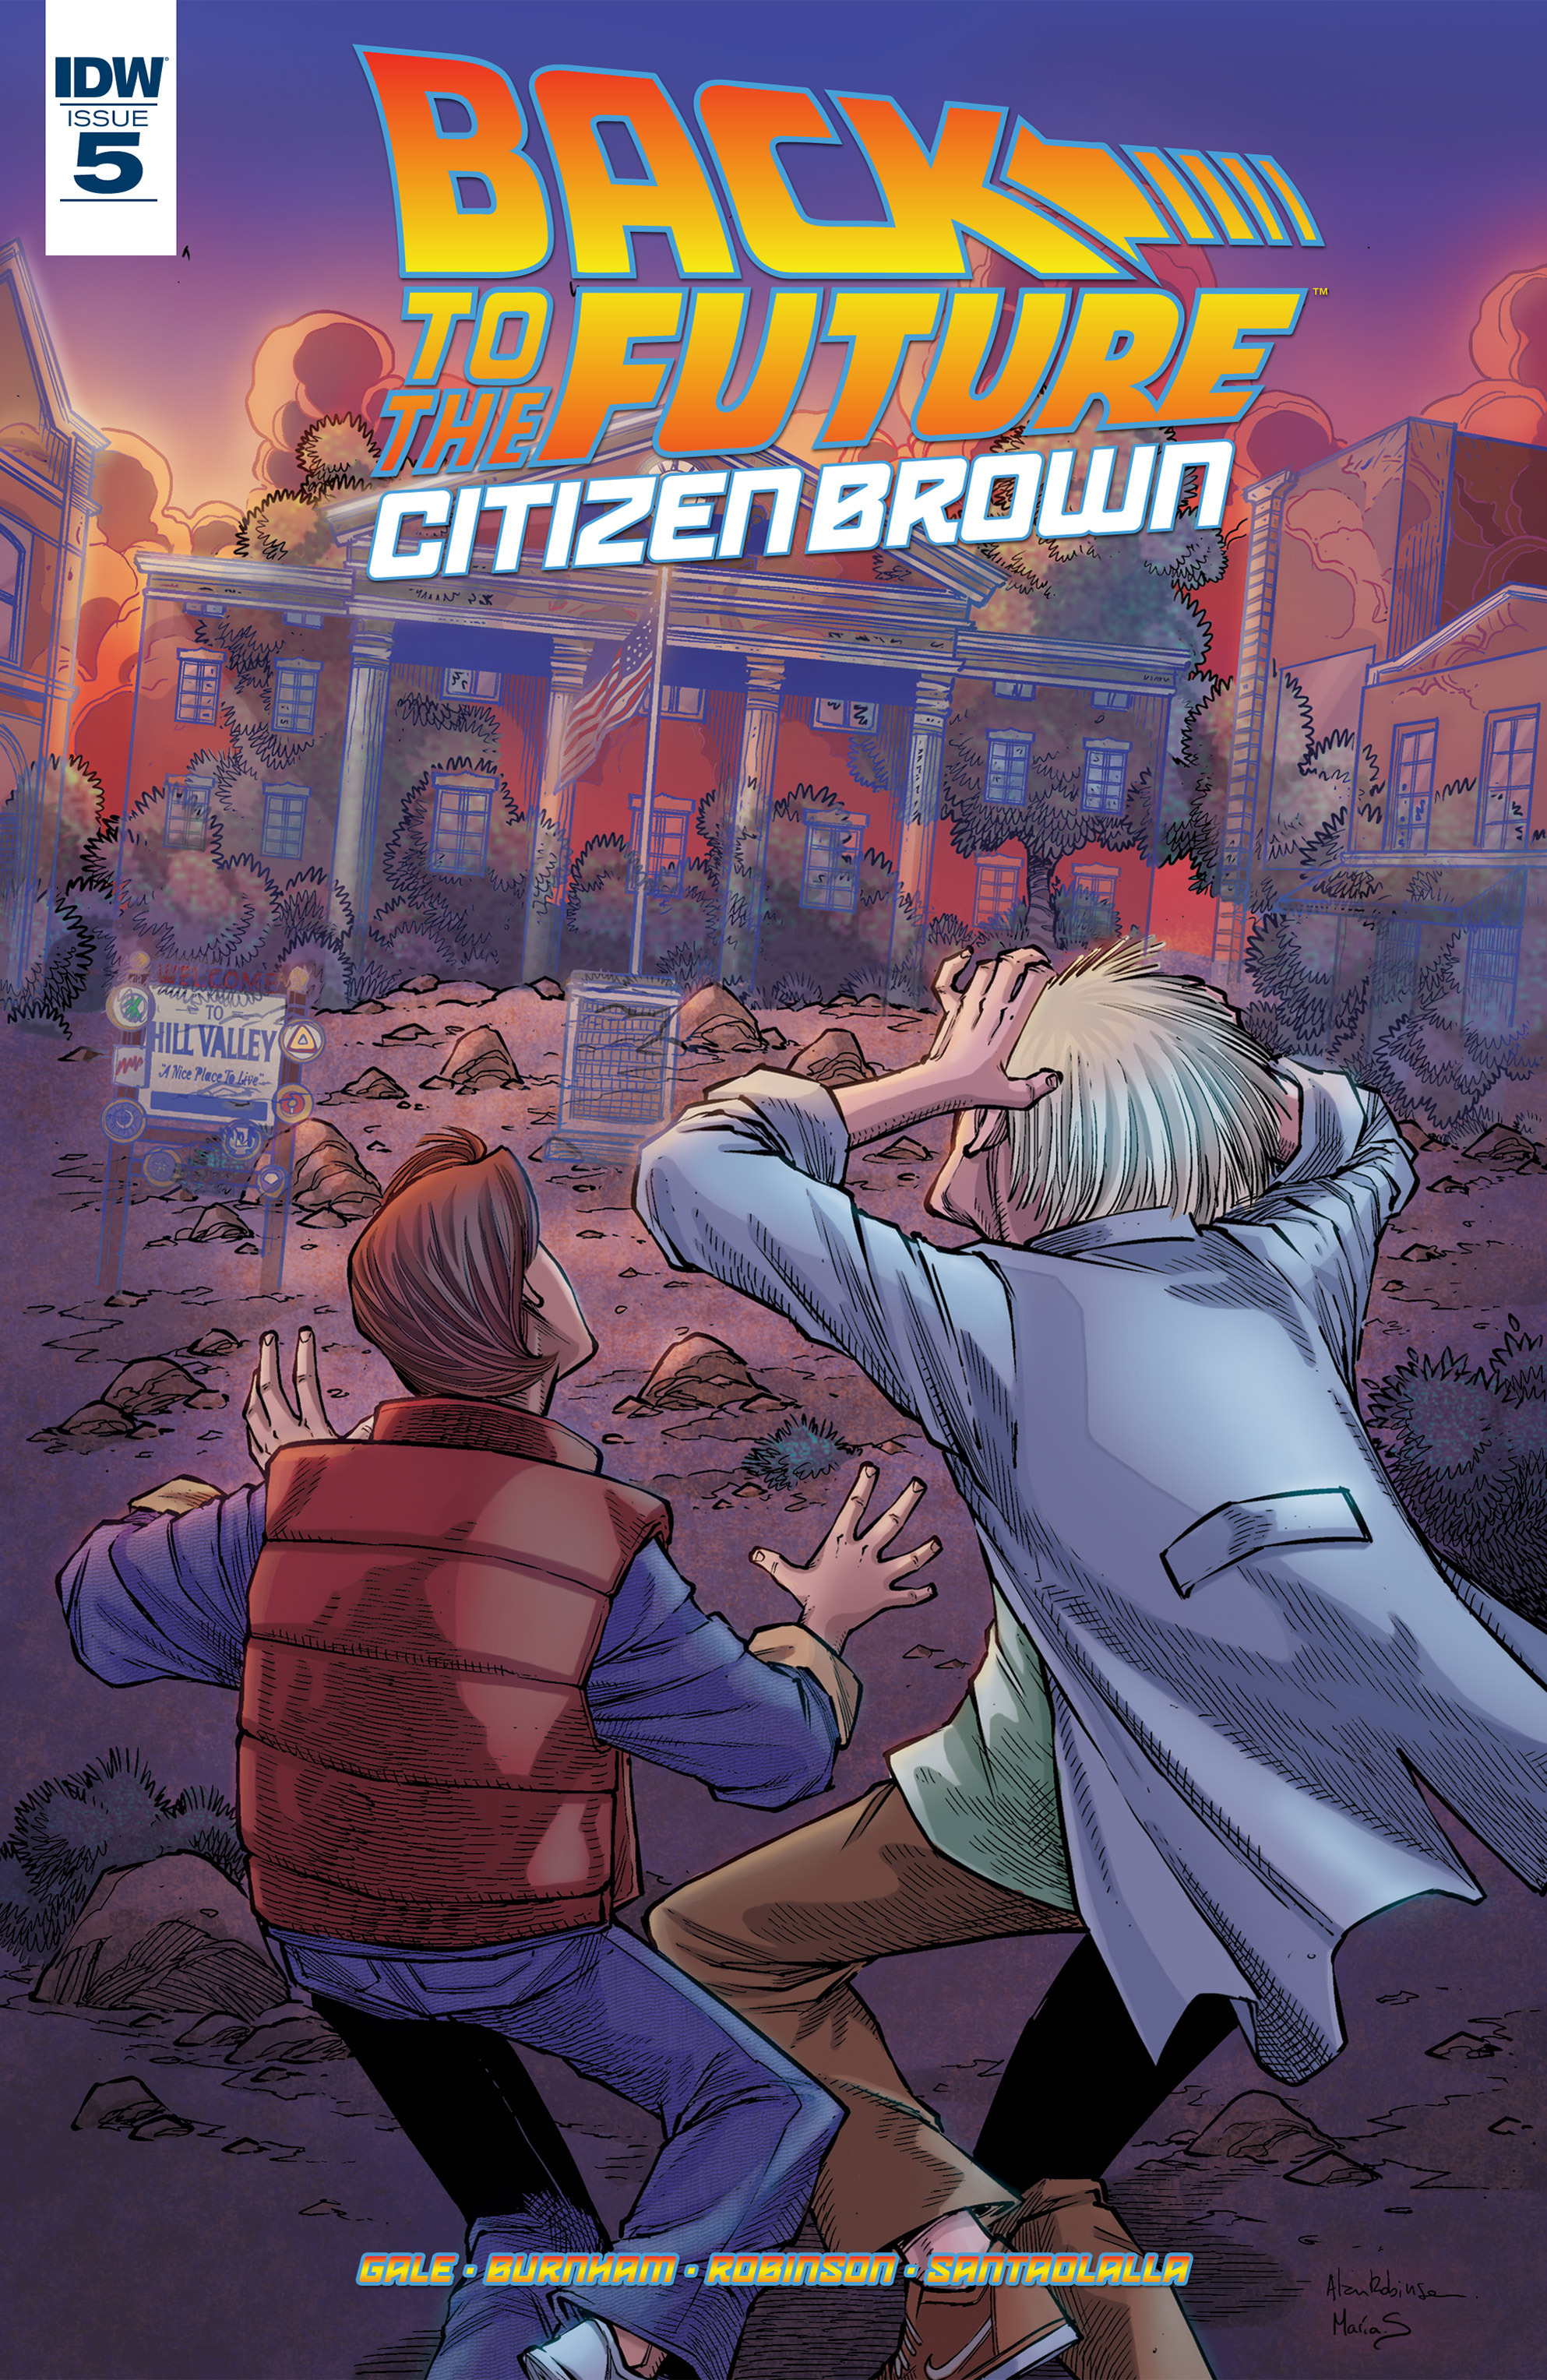 Read online Back to the Future: Citizen Brown comic -  Issue #5 - 1